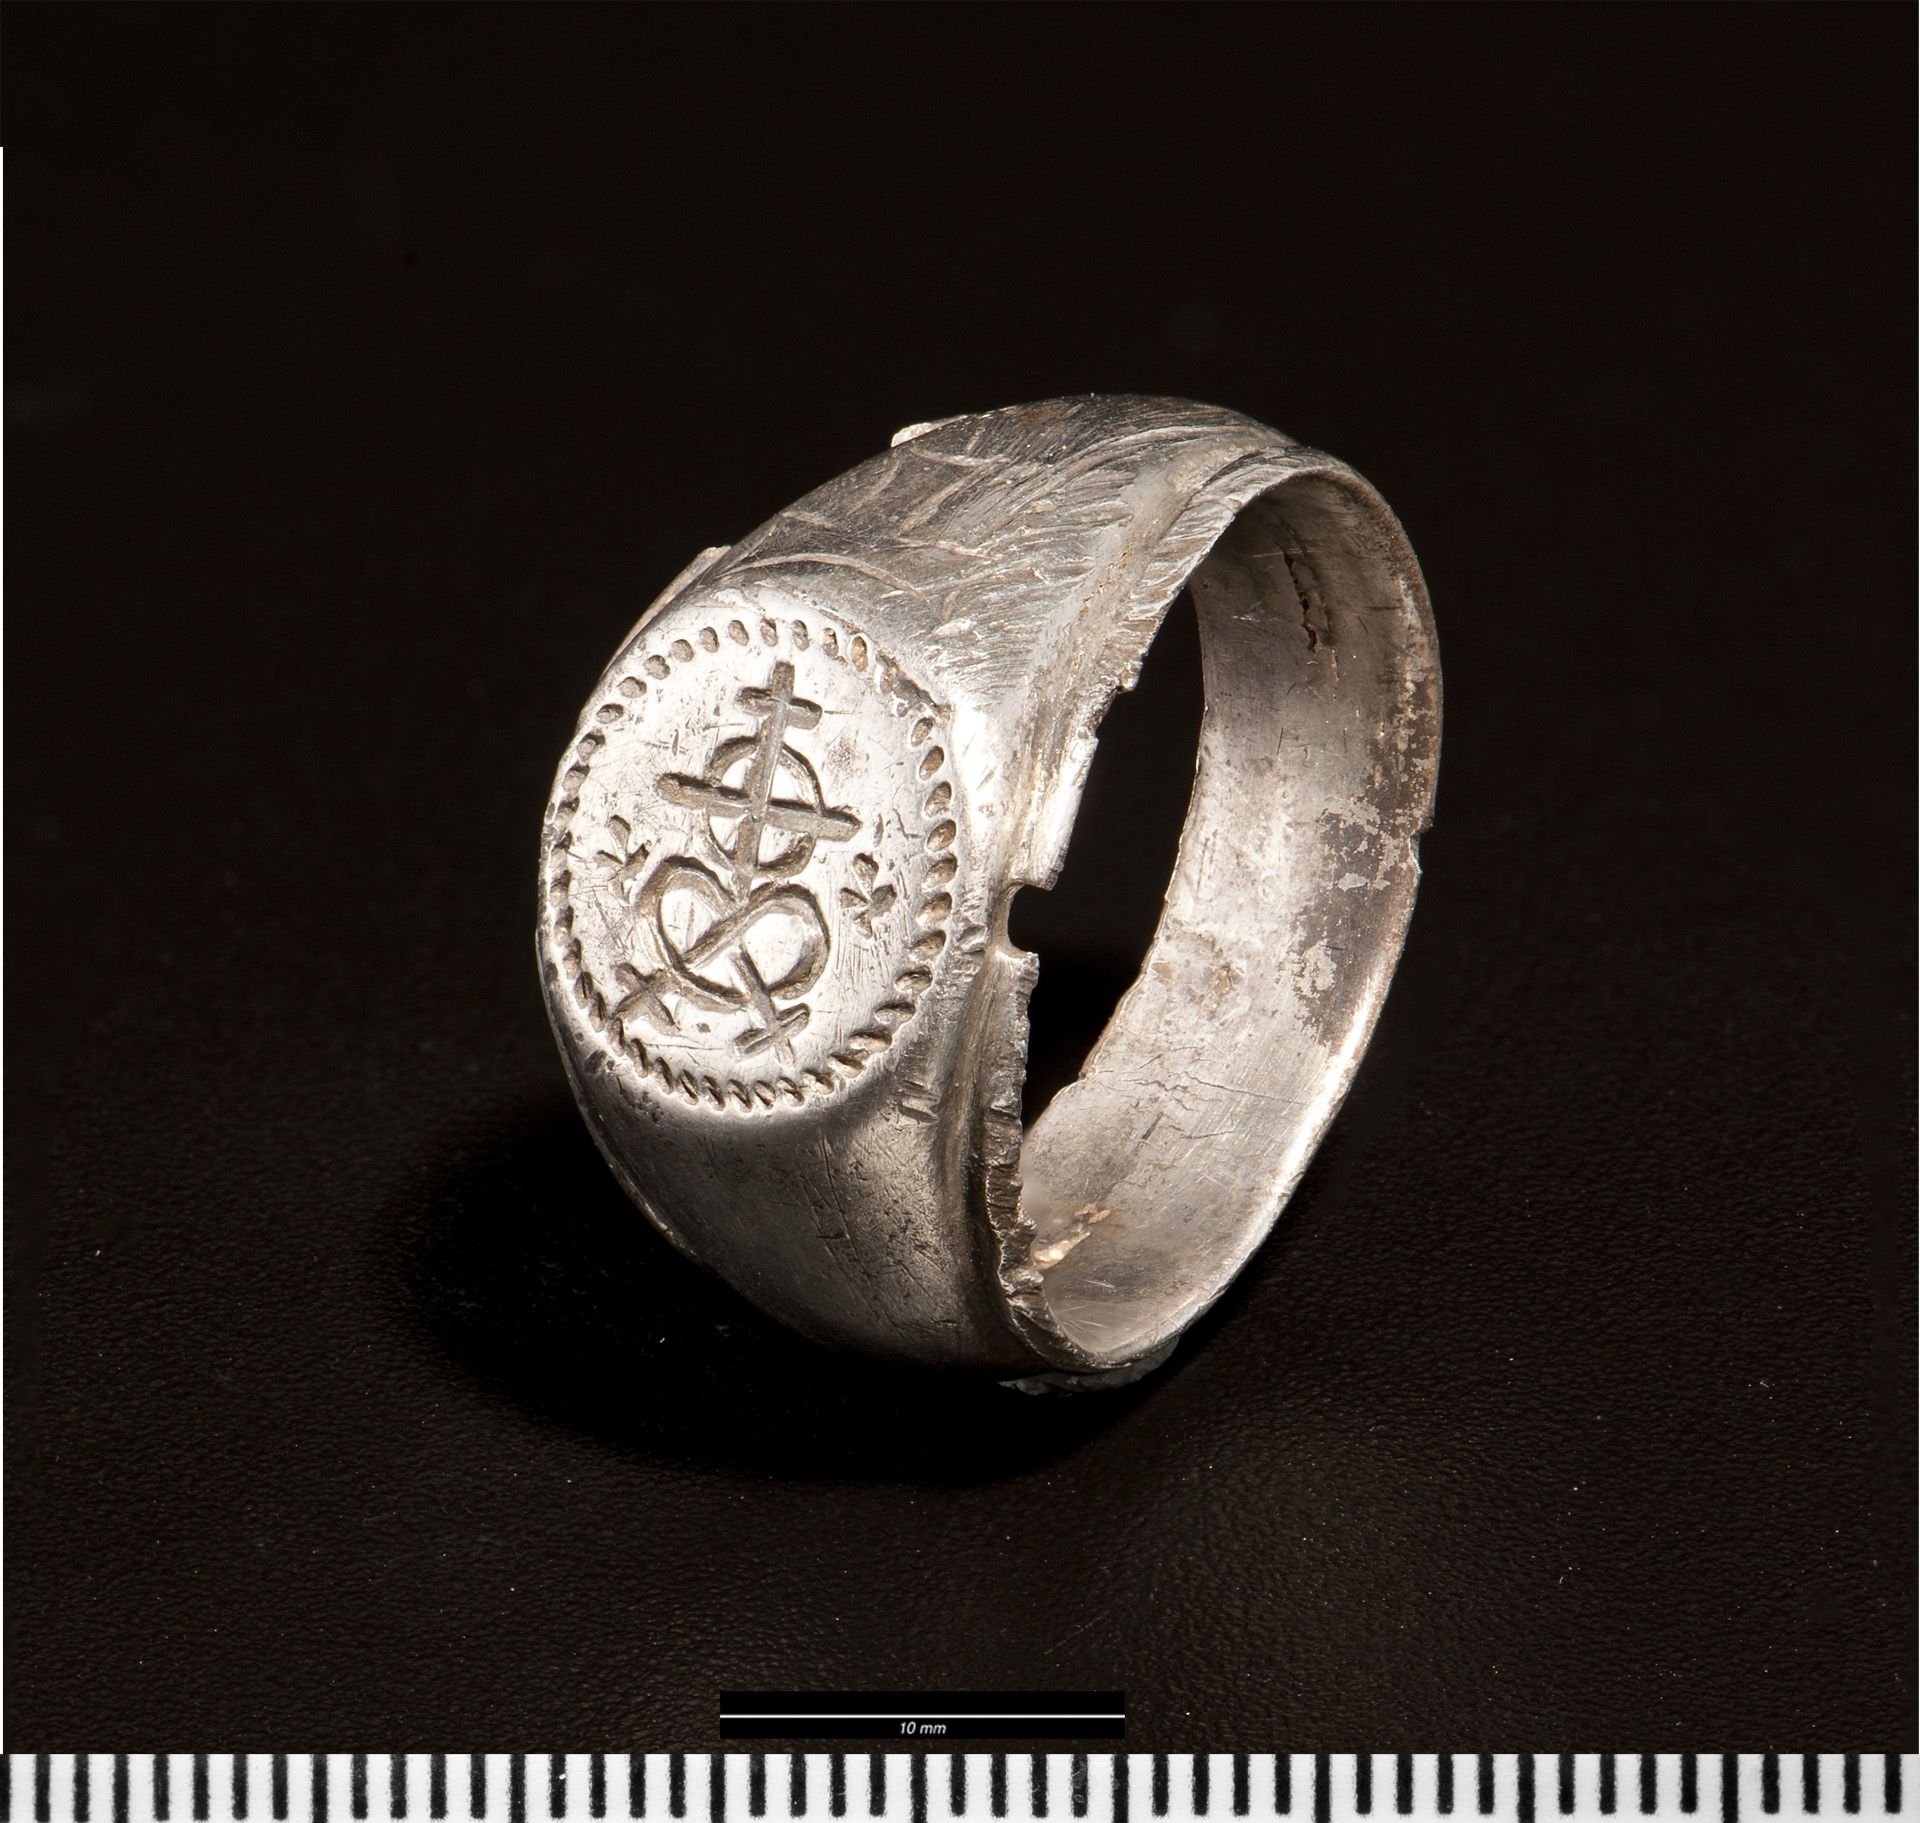 Merchant's signet ring from Haverfordwest